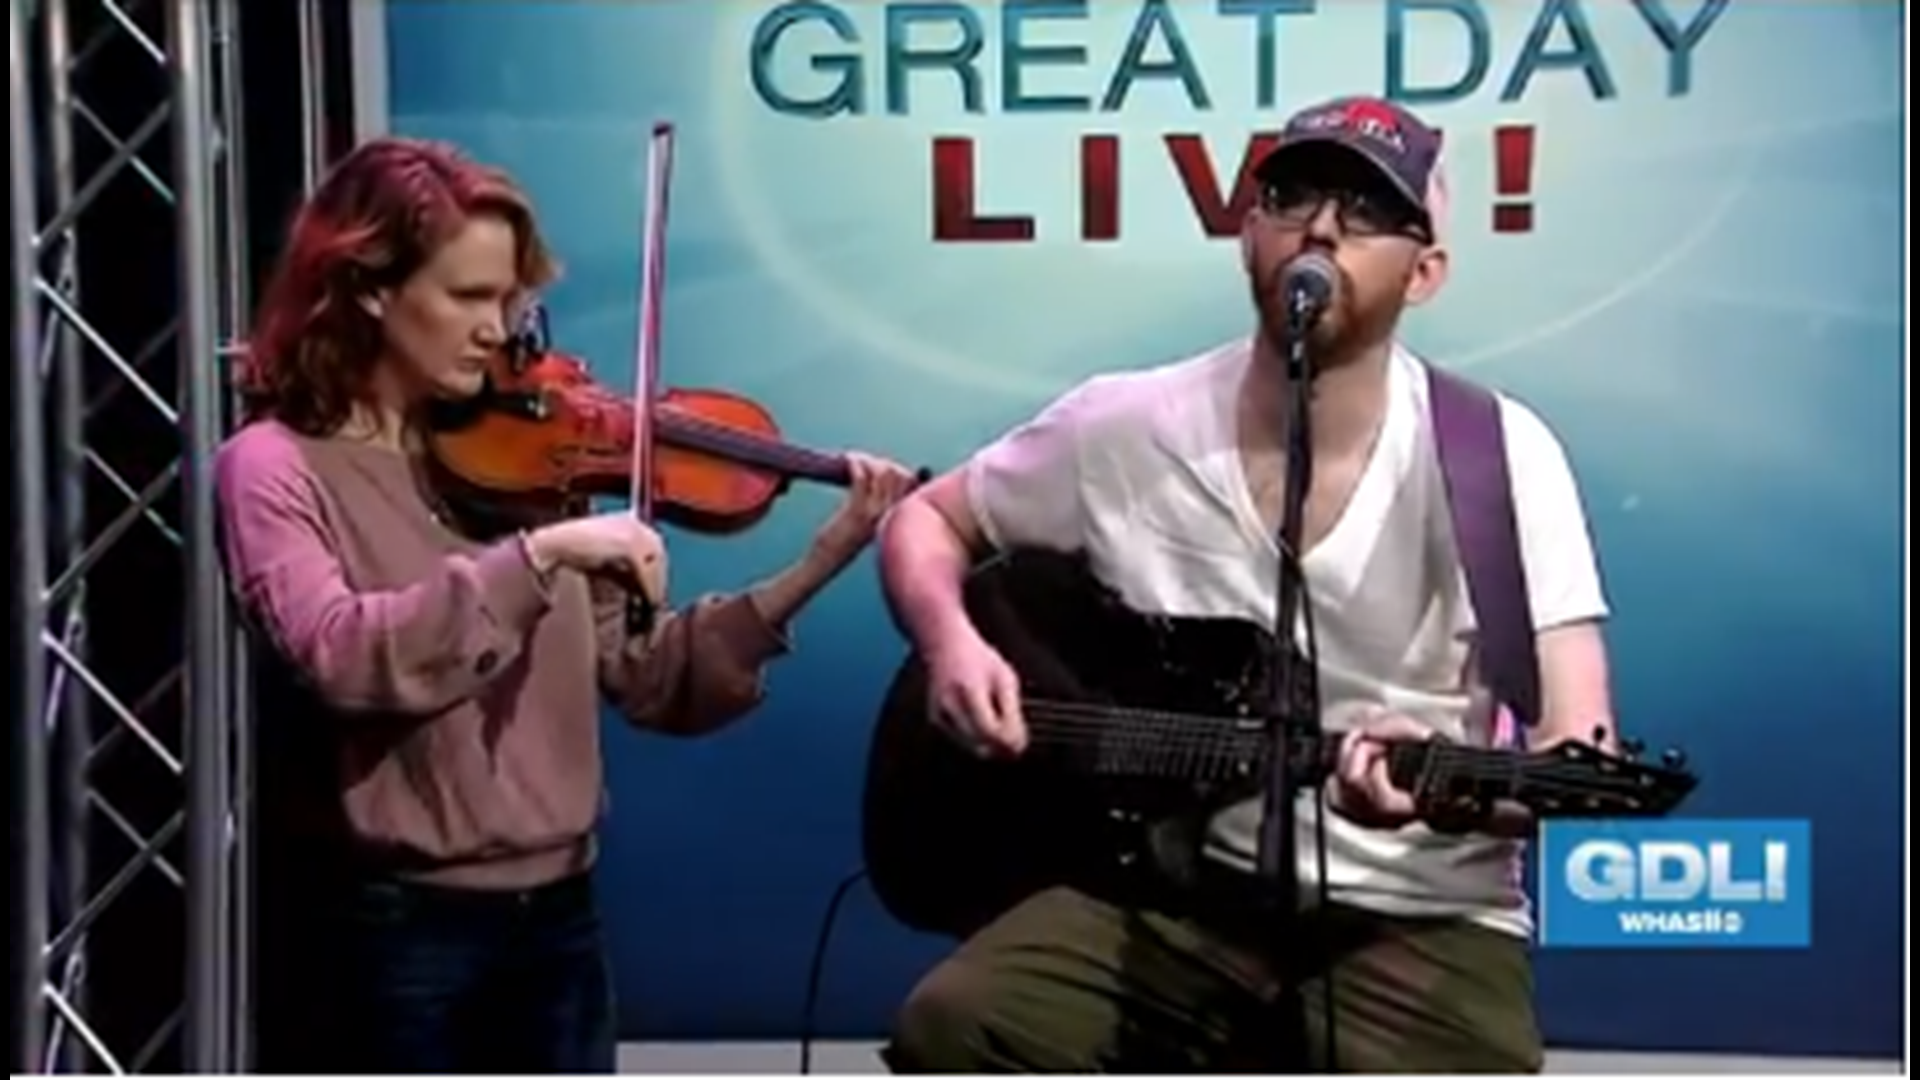 Musician Kyle Zornes performed with Emily Miller on Great Day Live.